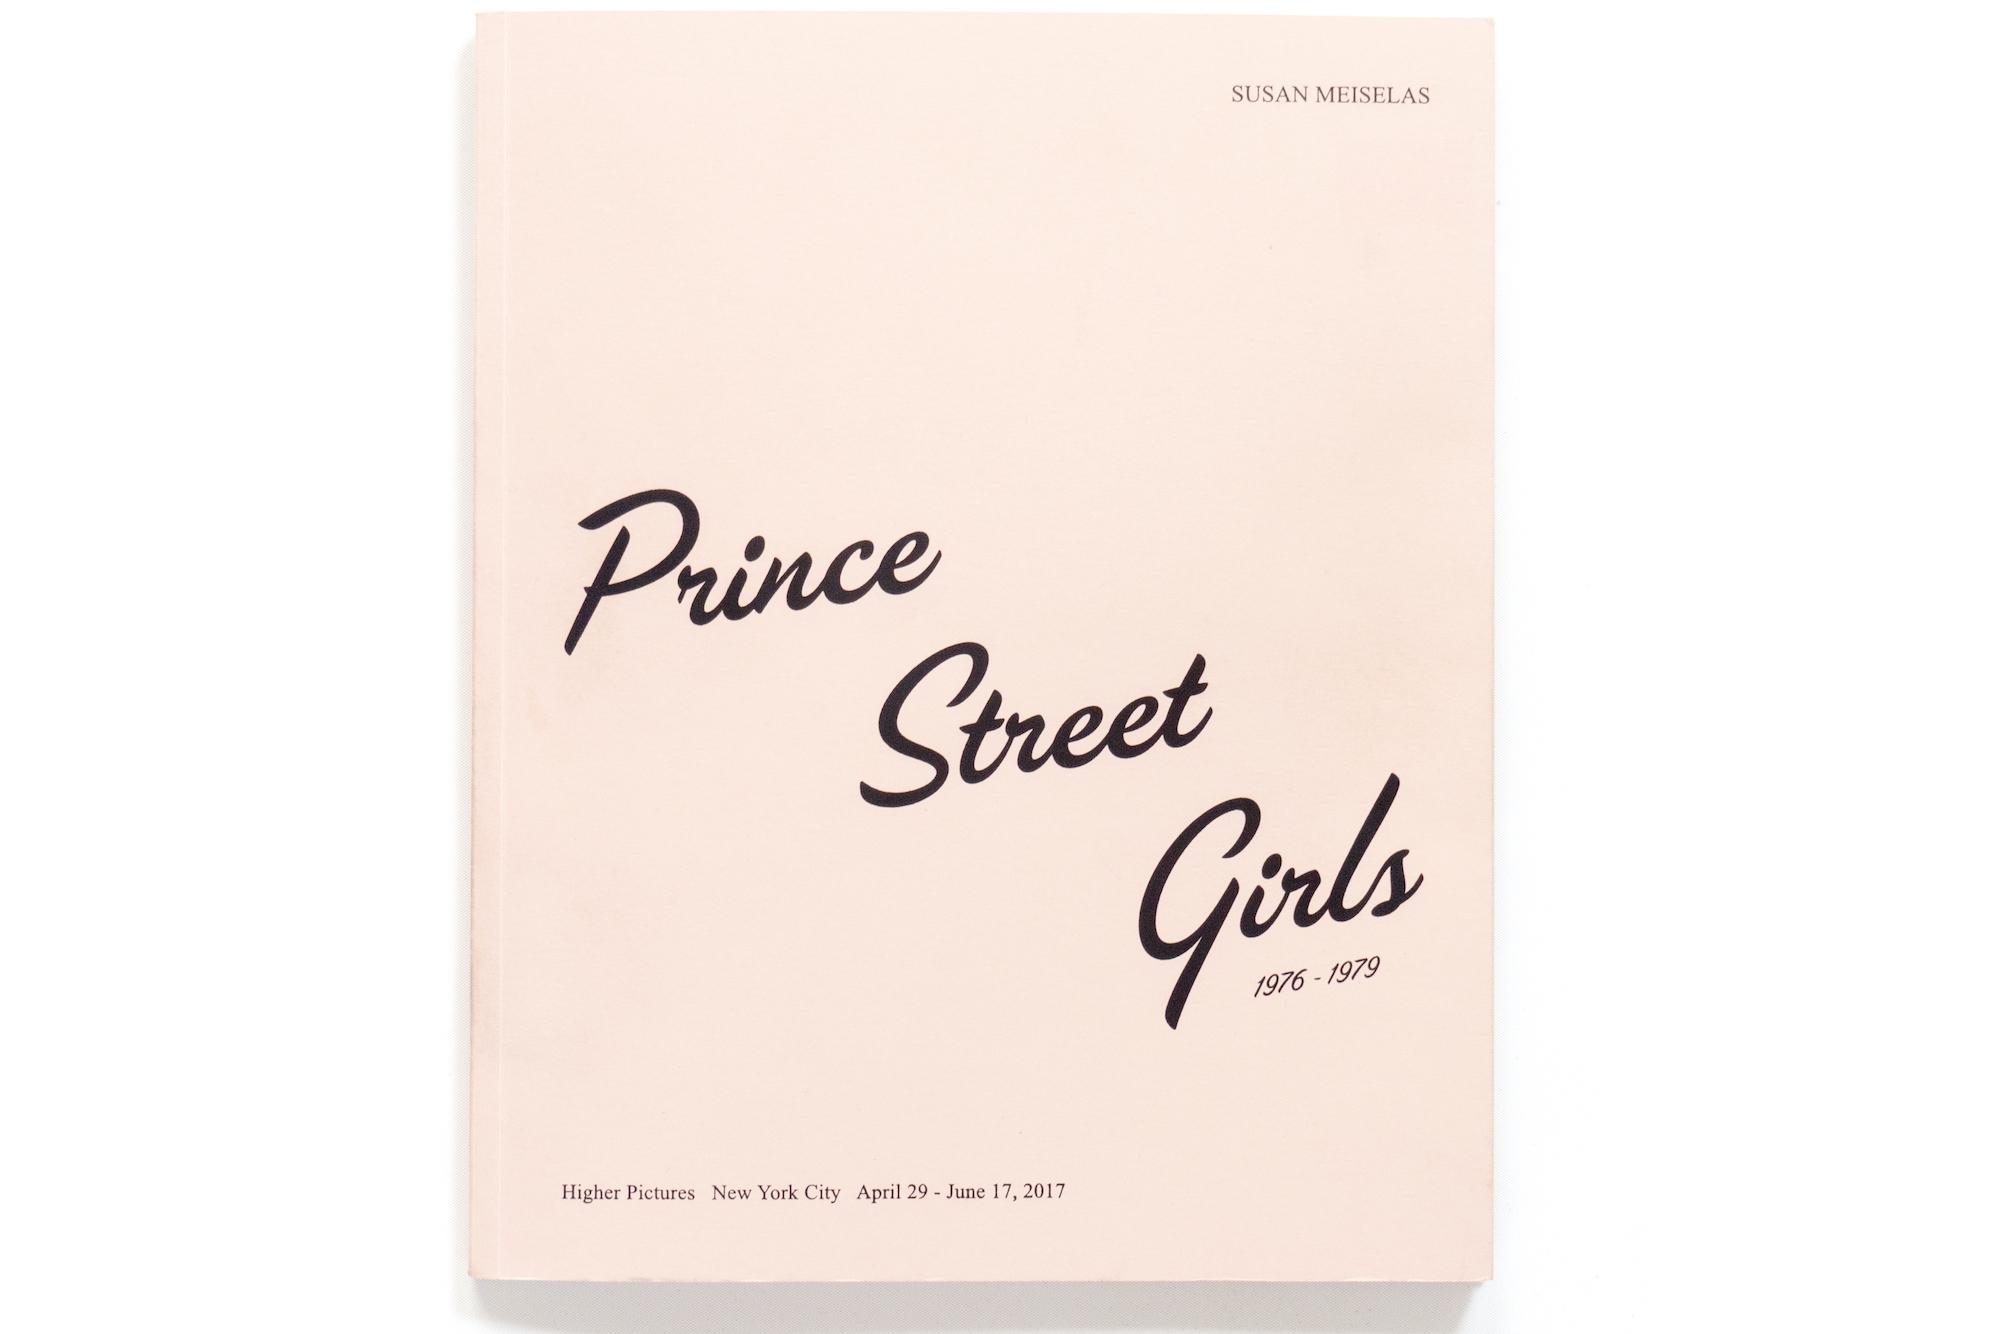 Prince Street Girls Exhibitions - Catalogue for Prince Street Girls at Higher Pictures, 2017